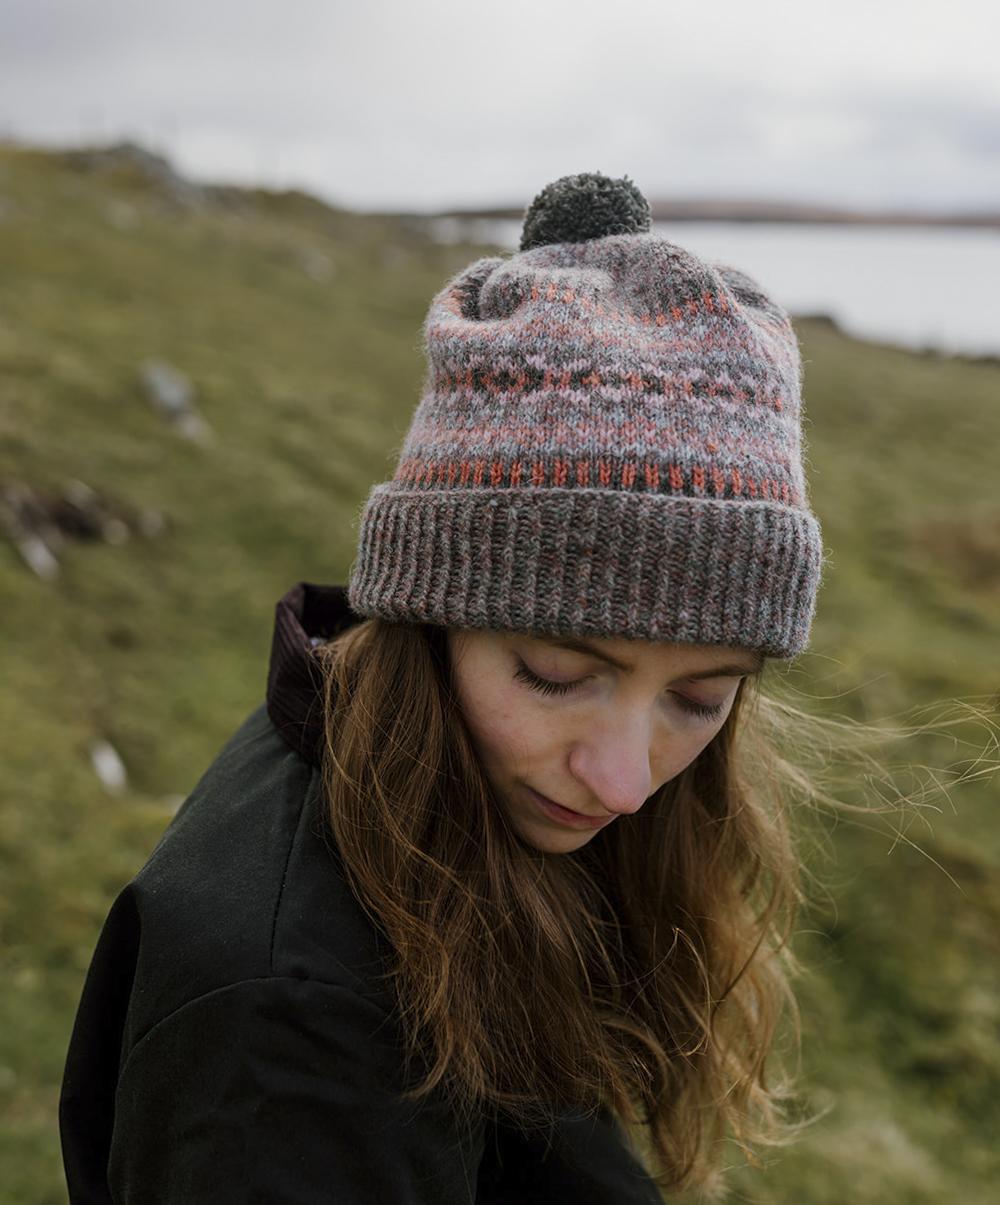 A woman with red hair gazes downwards with a cliff behind her; on her head she wears a richly-patterned hat in shades of grey and pink